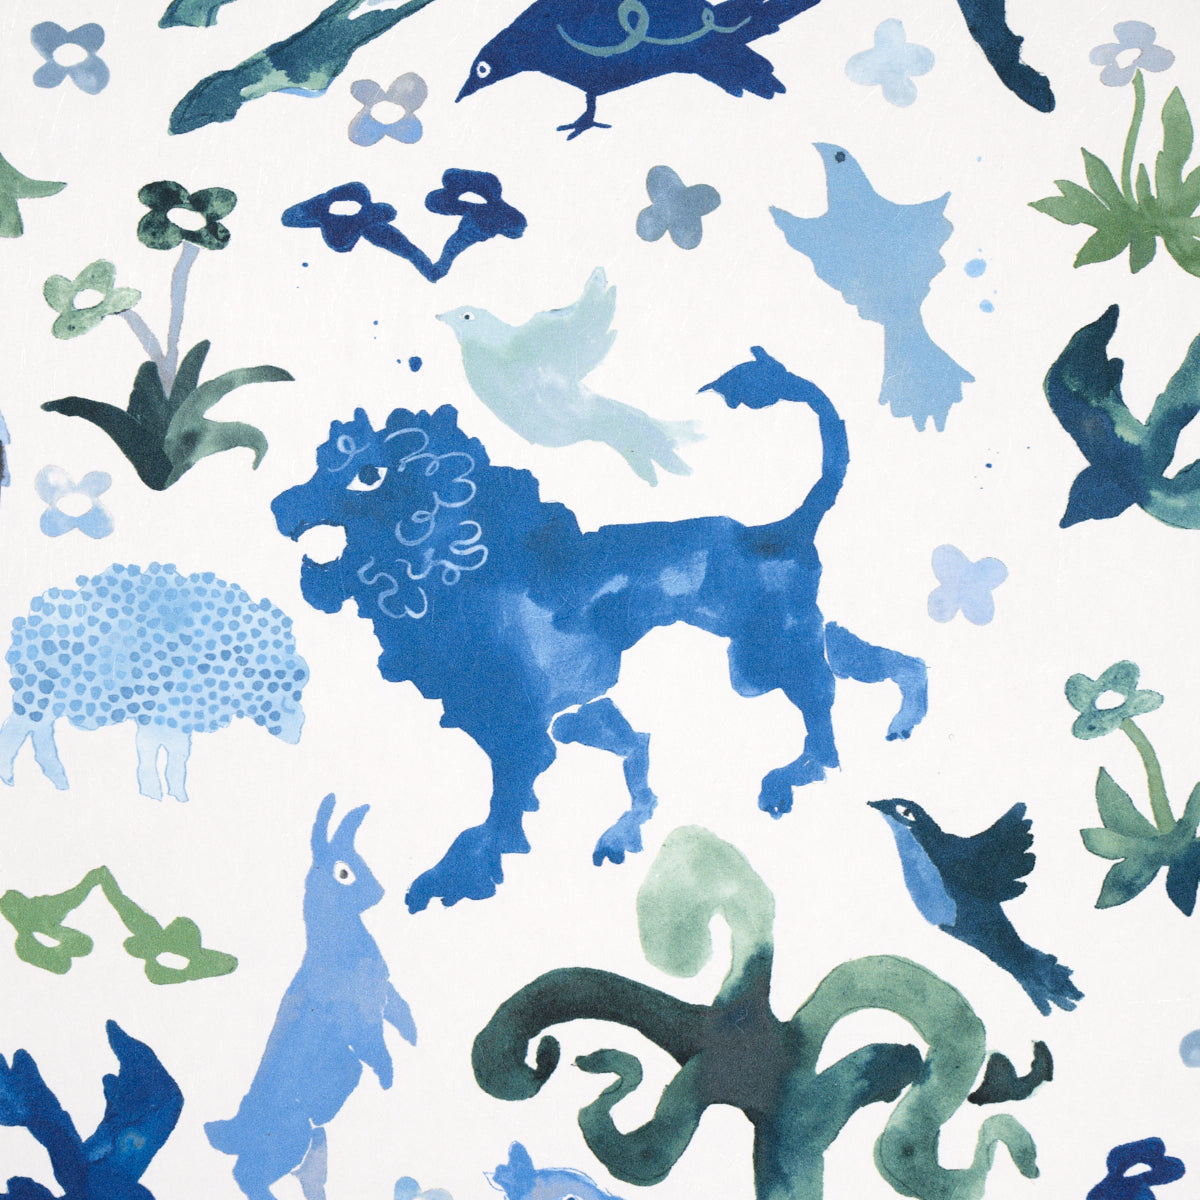 BEASTS | BLUE AND GREEN